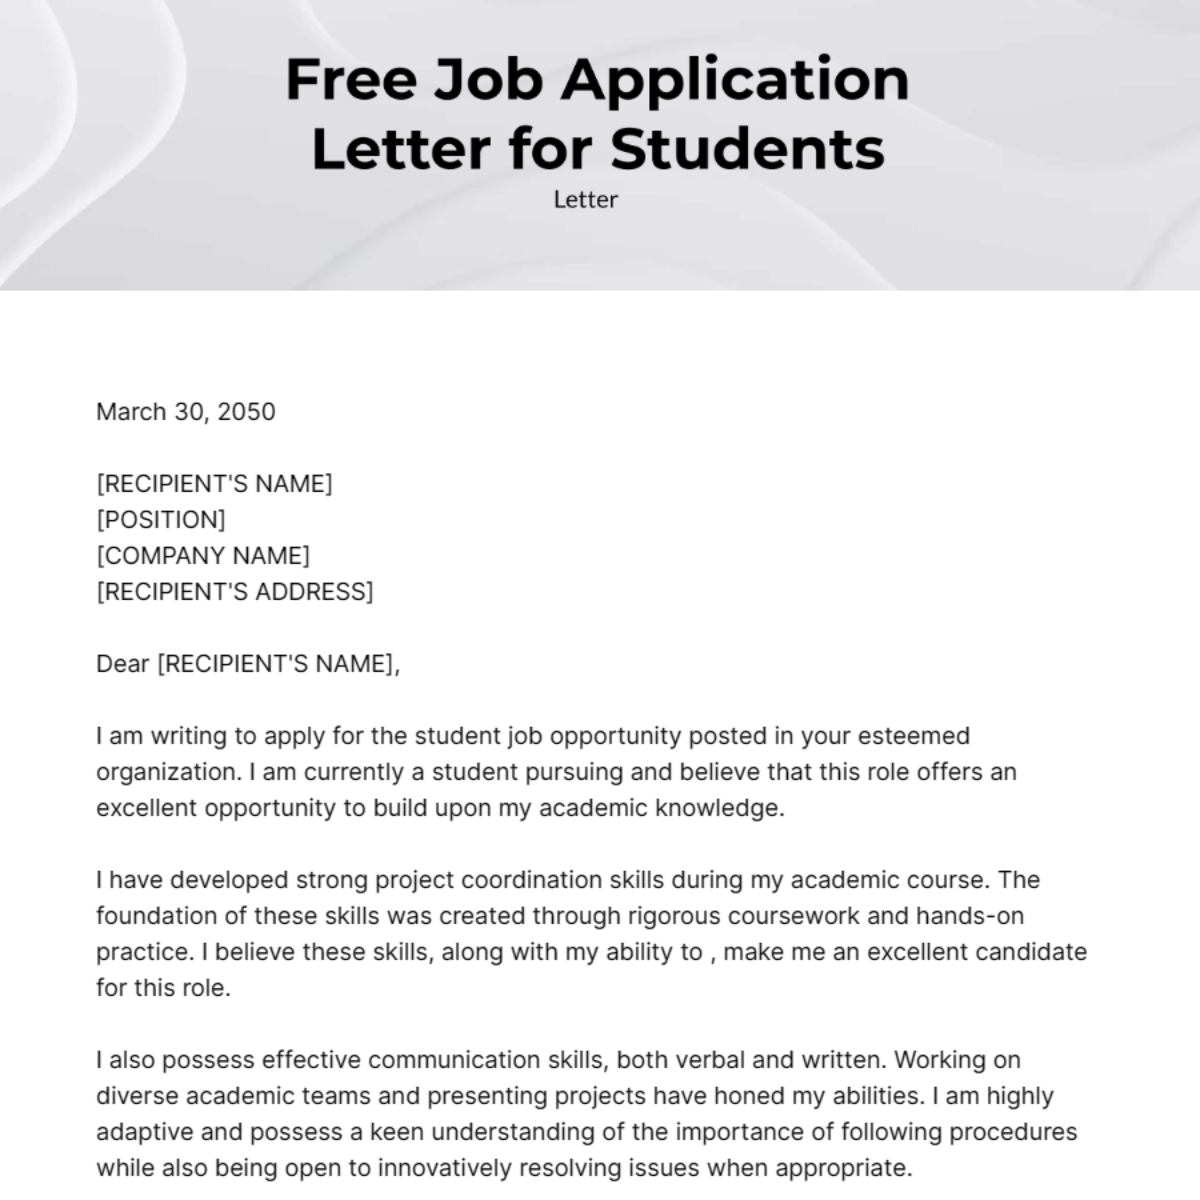 Job Application Letter for Students Template